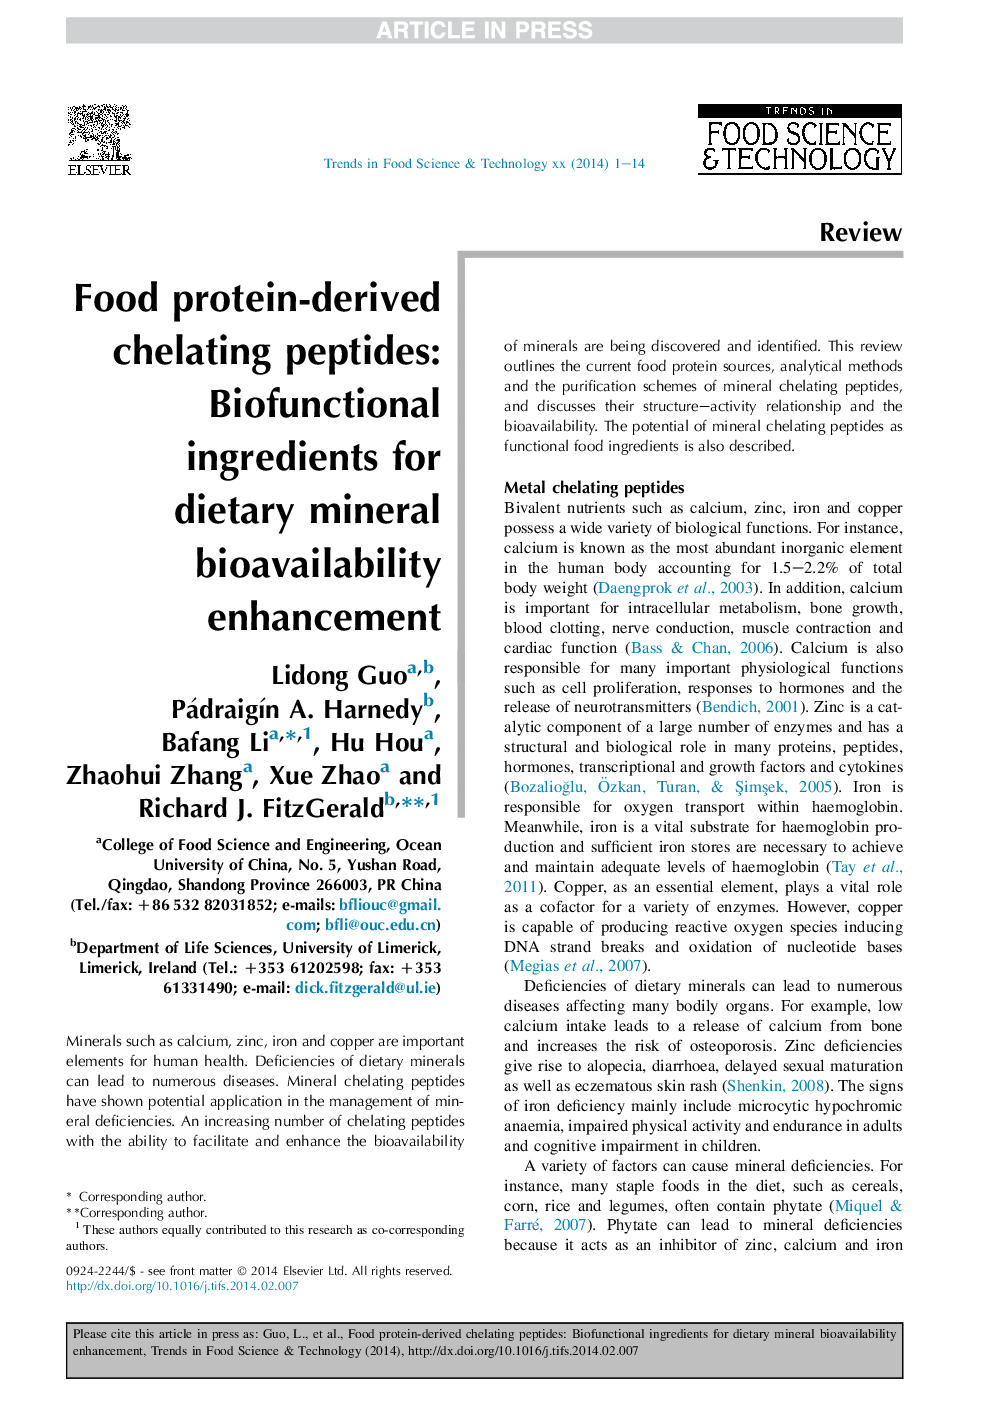 Food protein-derived chelating peptides: Biofunctional ingredients for dietary mineral bioavailability enhancement